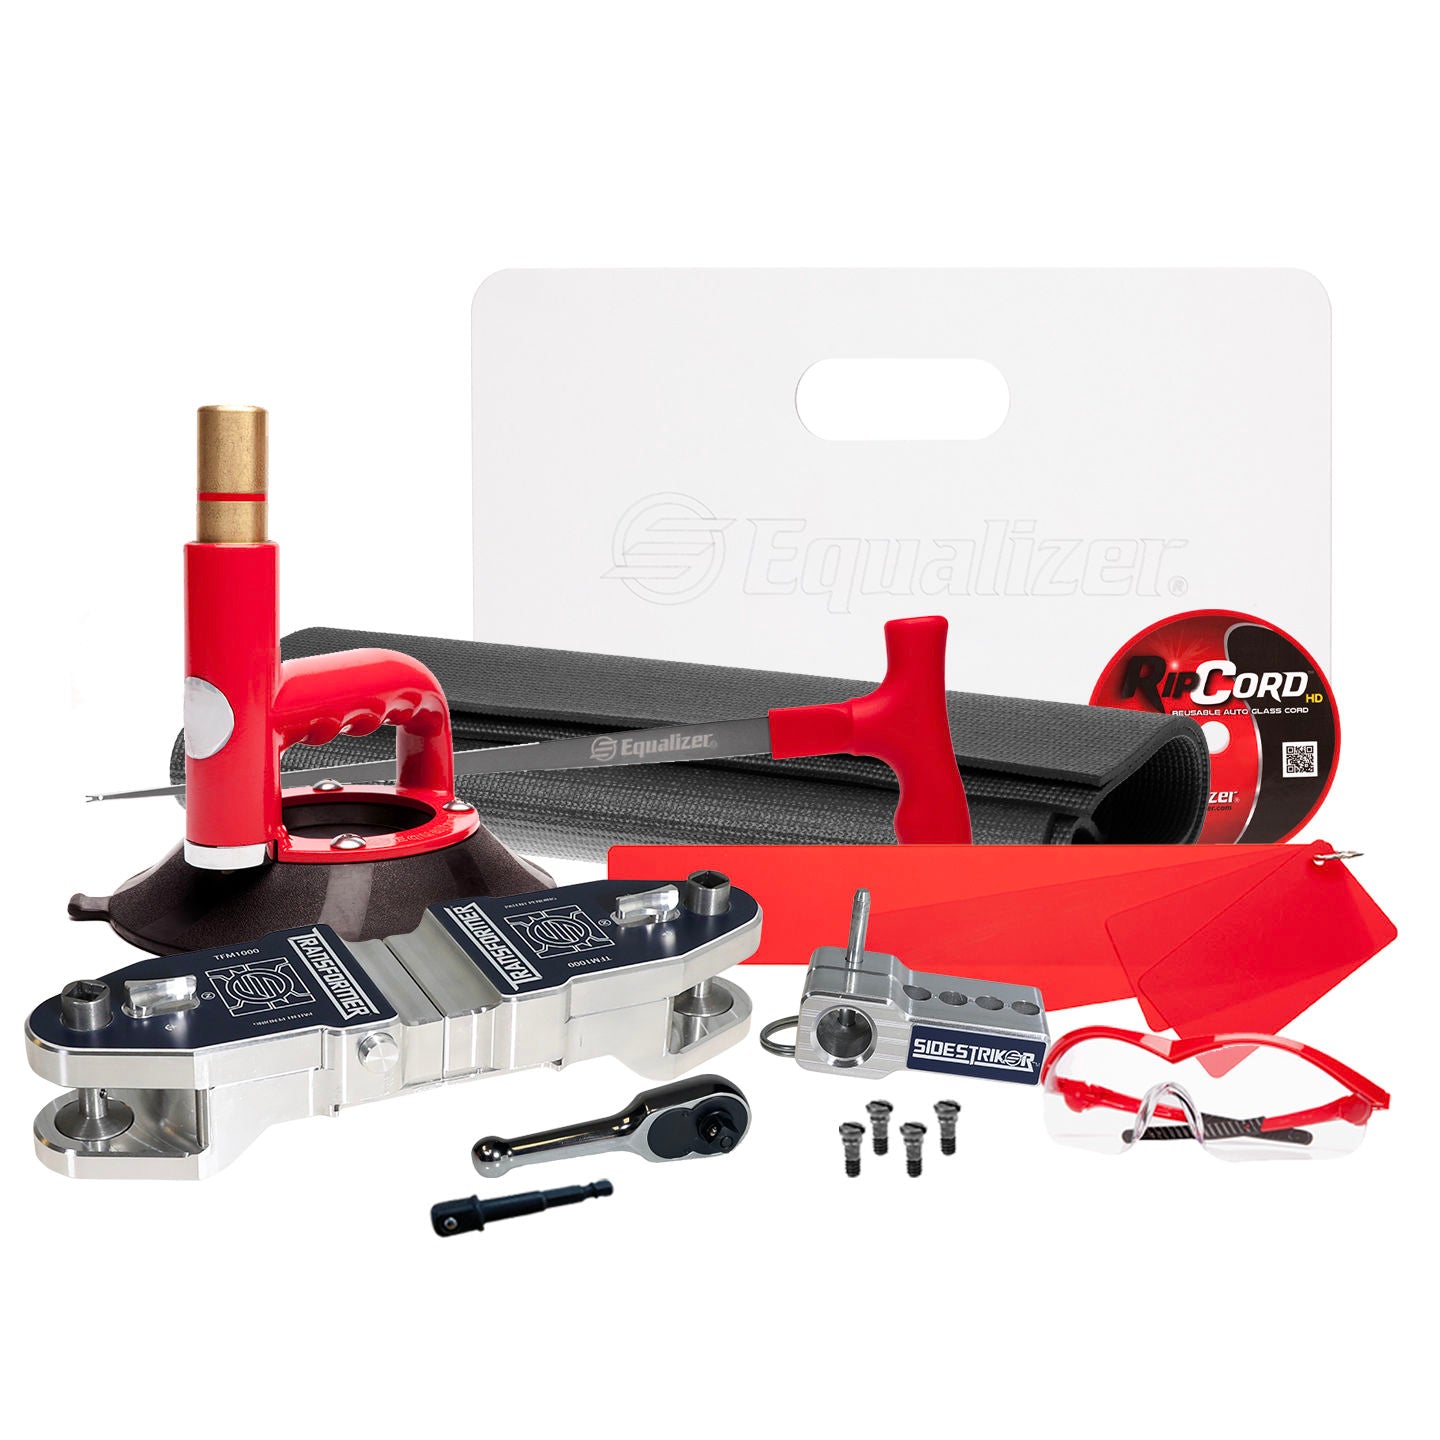 Equalizer Professional Glass Removal Kits With Milwaukee Caulking Gun - Kit Designed by the 40 + Experienced Auto Glass Technicians